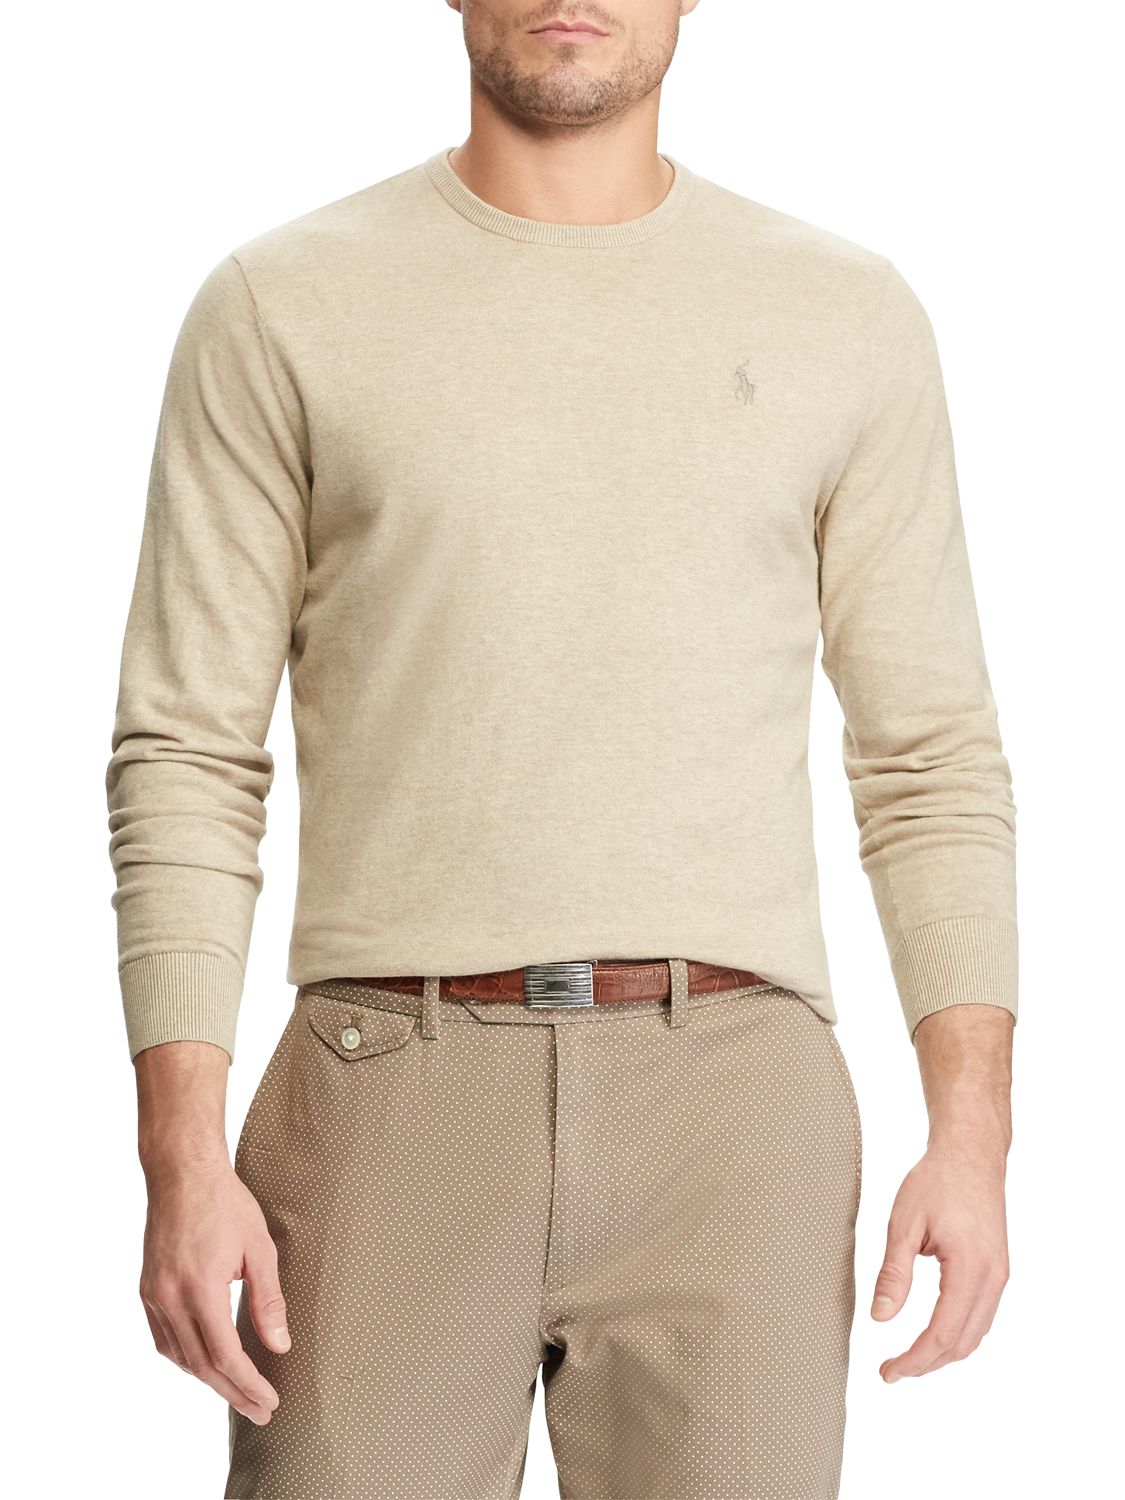 Polo Golf by Ralph Lauren Long Sleeve Crew Neck Sweater at John Lewis ...